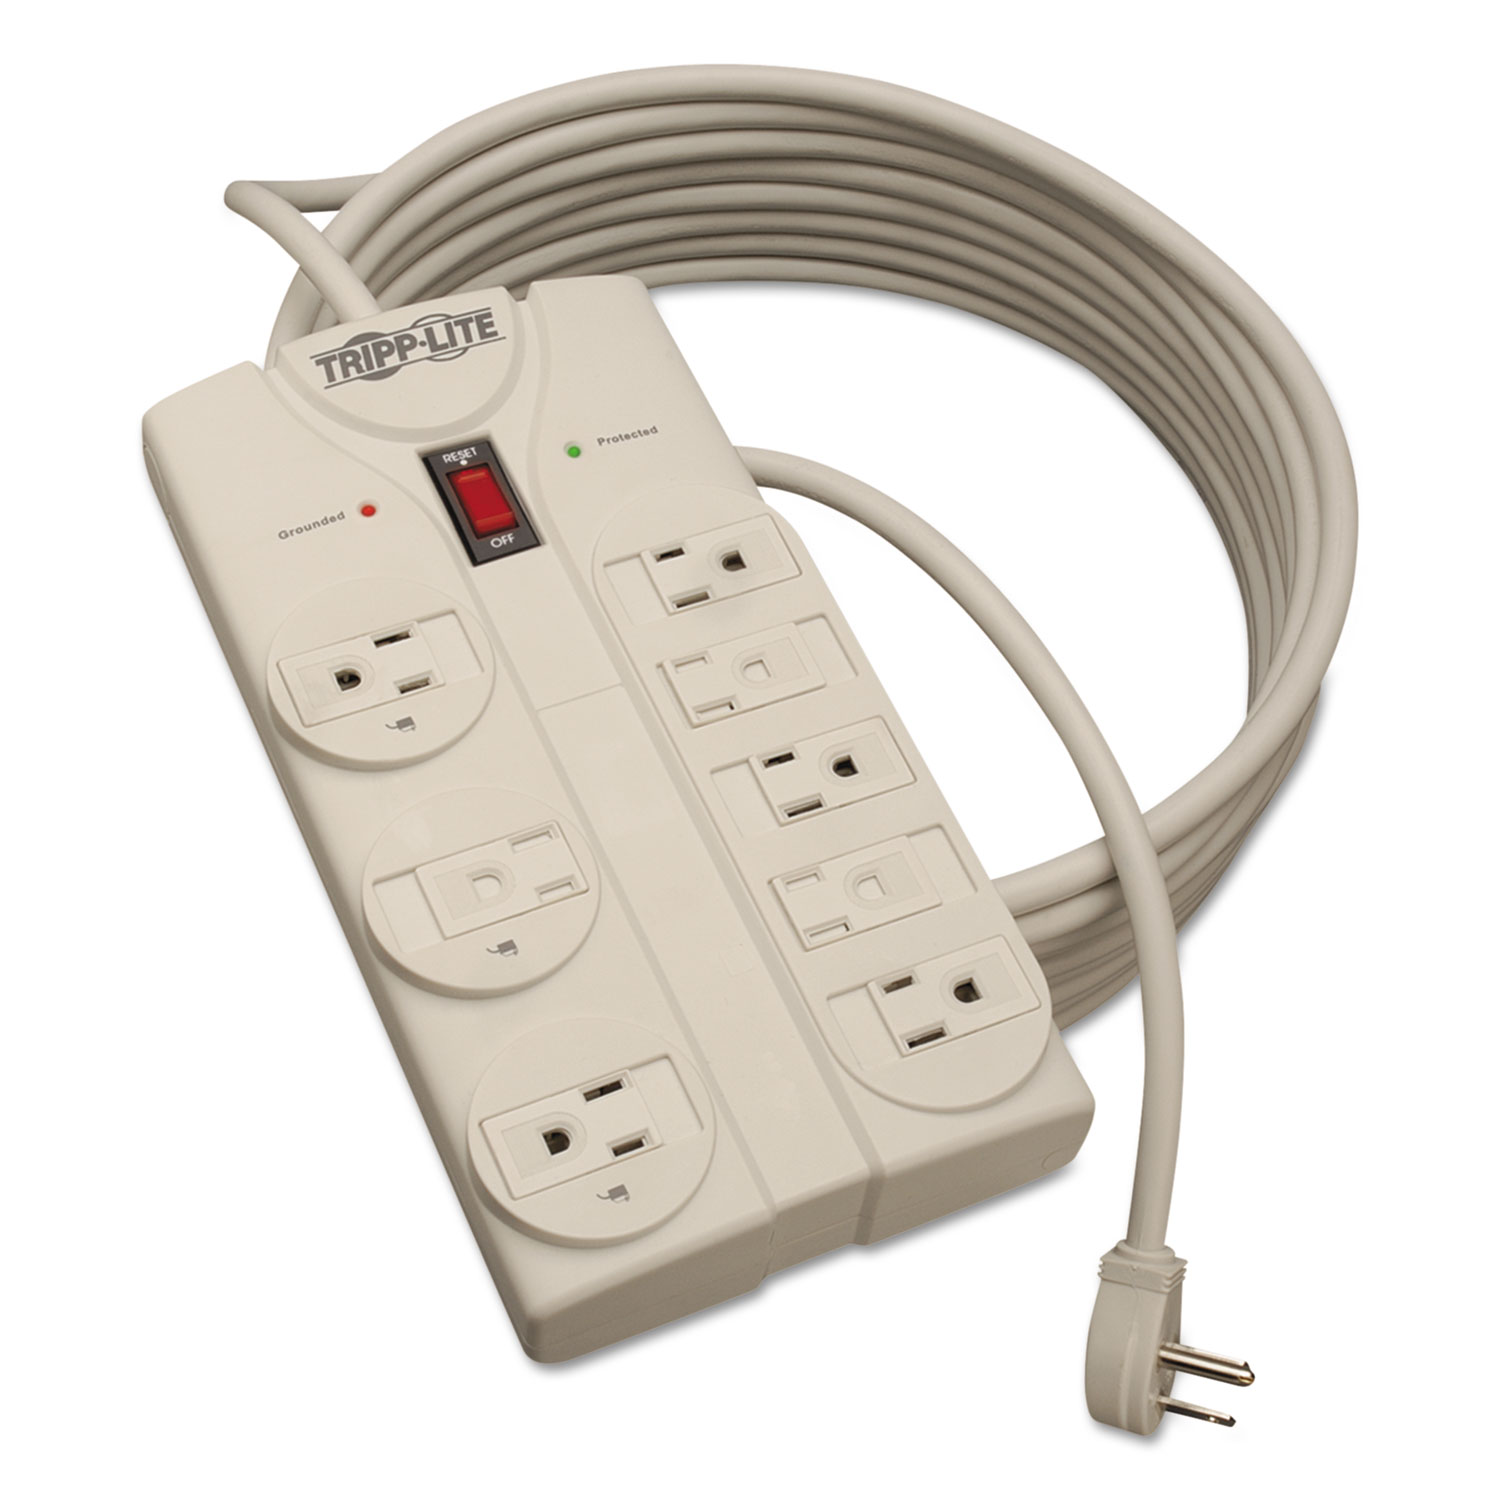 TLP825 Surge Suppressor, 8 Outlets, 25 ft Cord, 1440 Joules, Light Gray